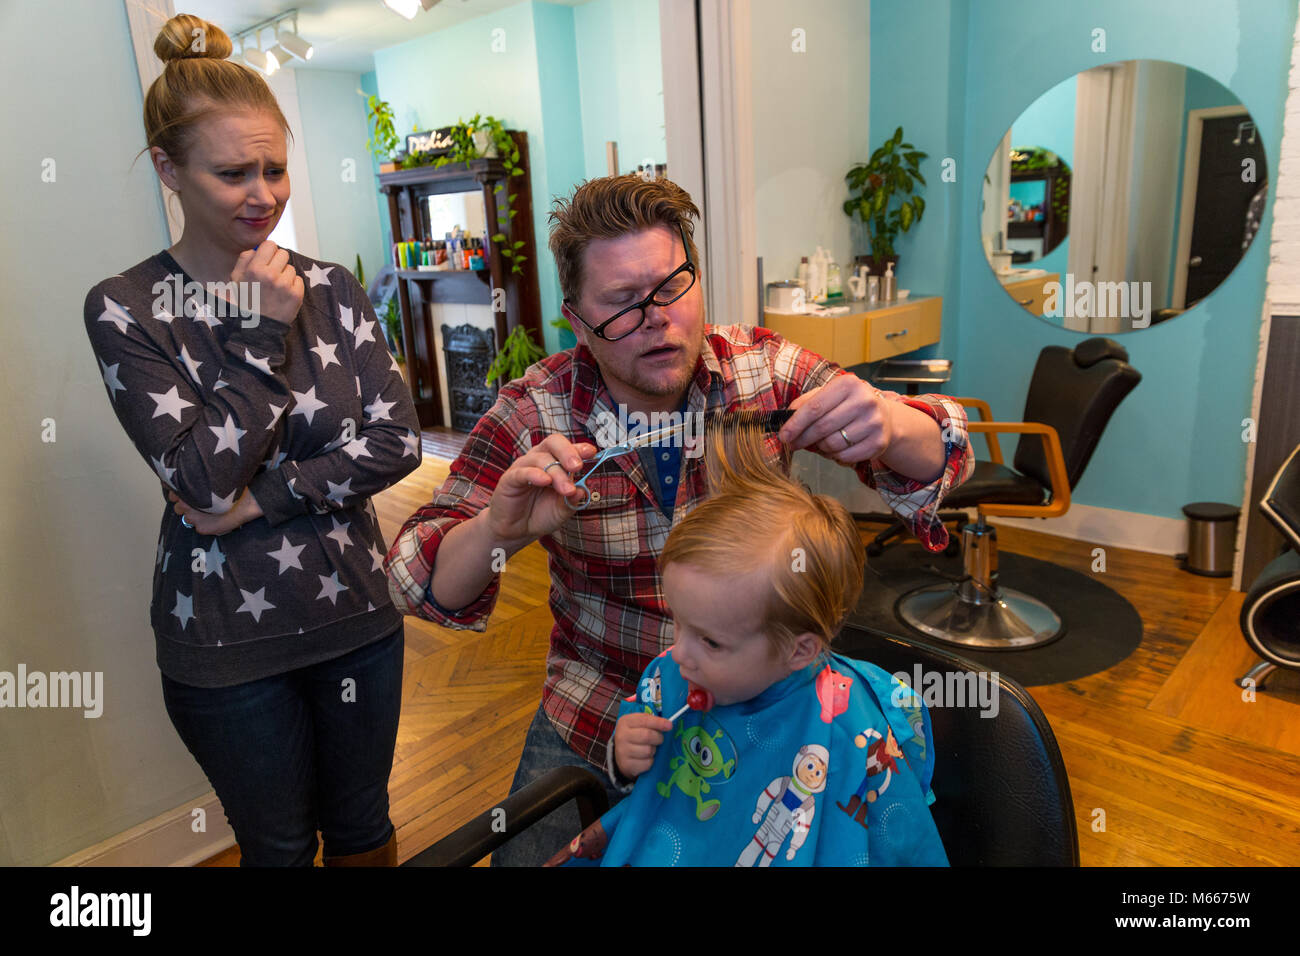 Caucasian Toddler Boy Has His Hair Cut By A Barber As His Mom Watches Stock Photo